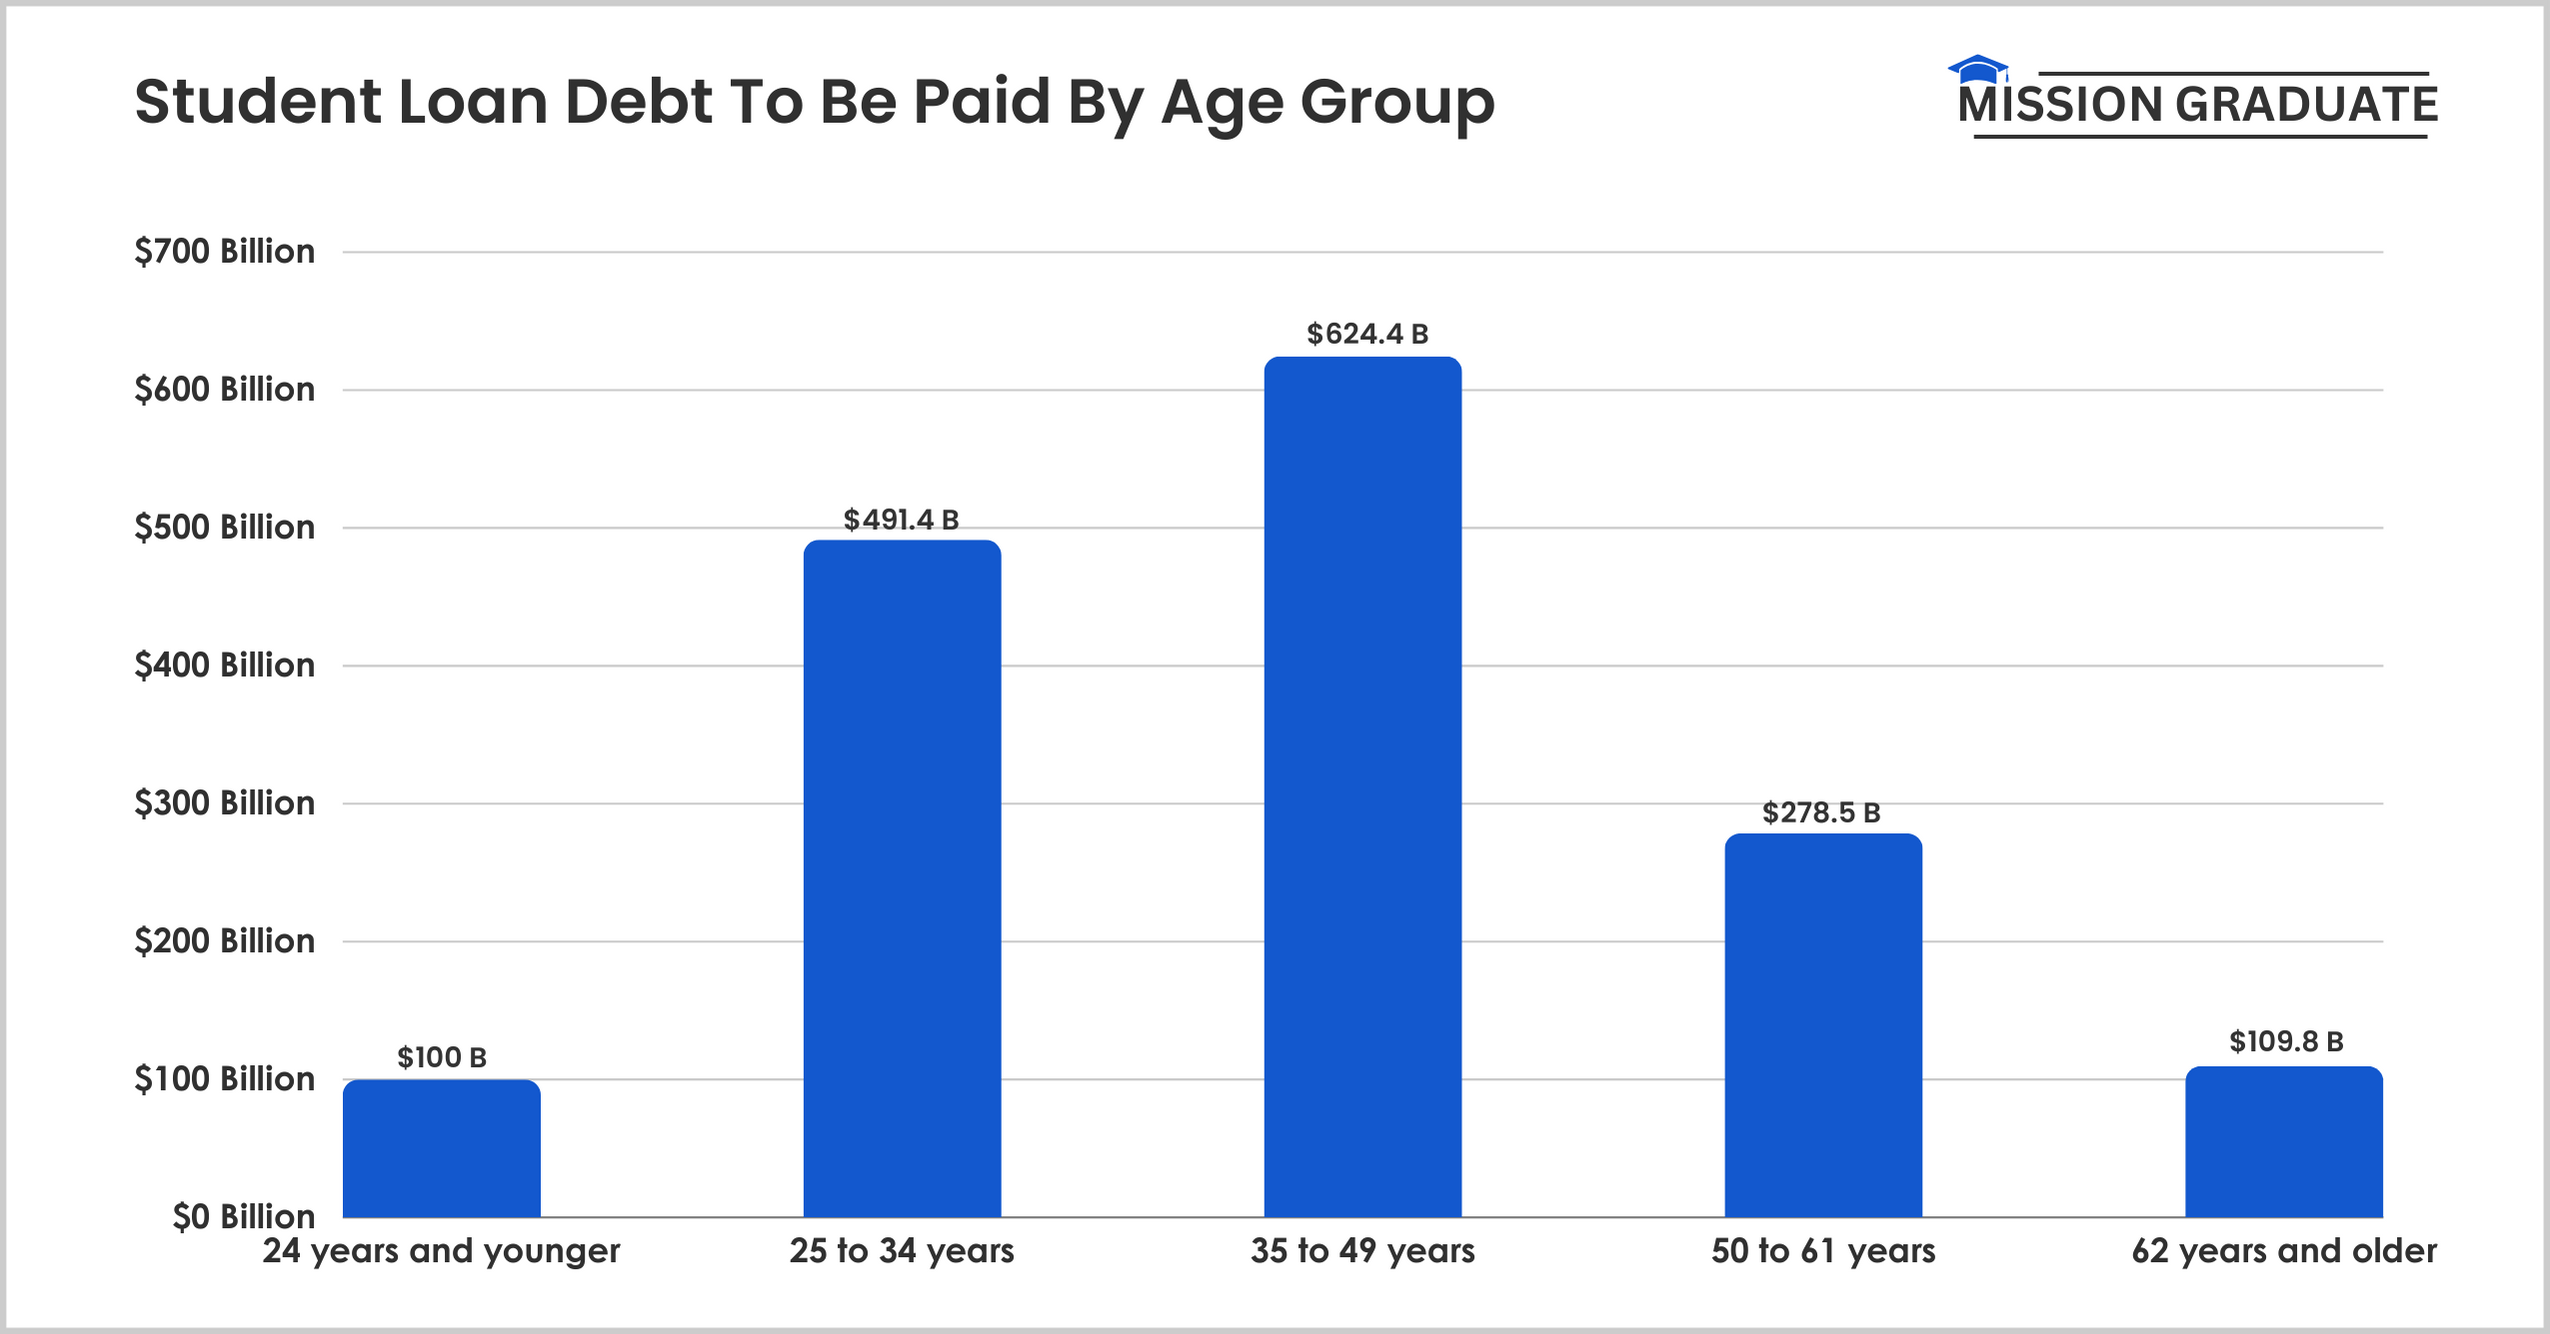 Student Loan Debt To Be Paid By Age Group